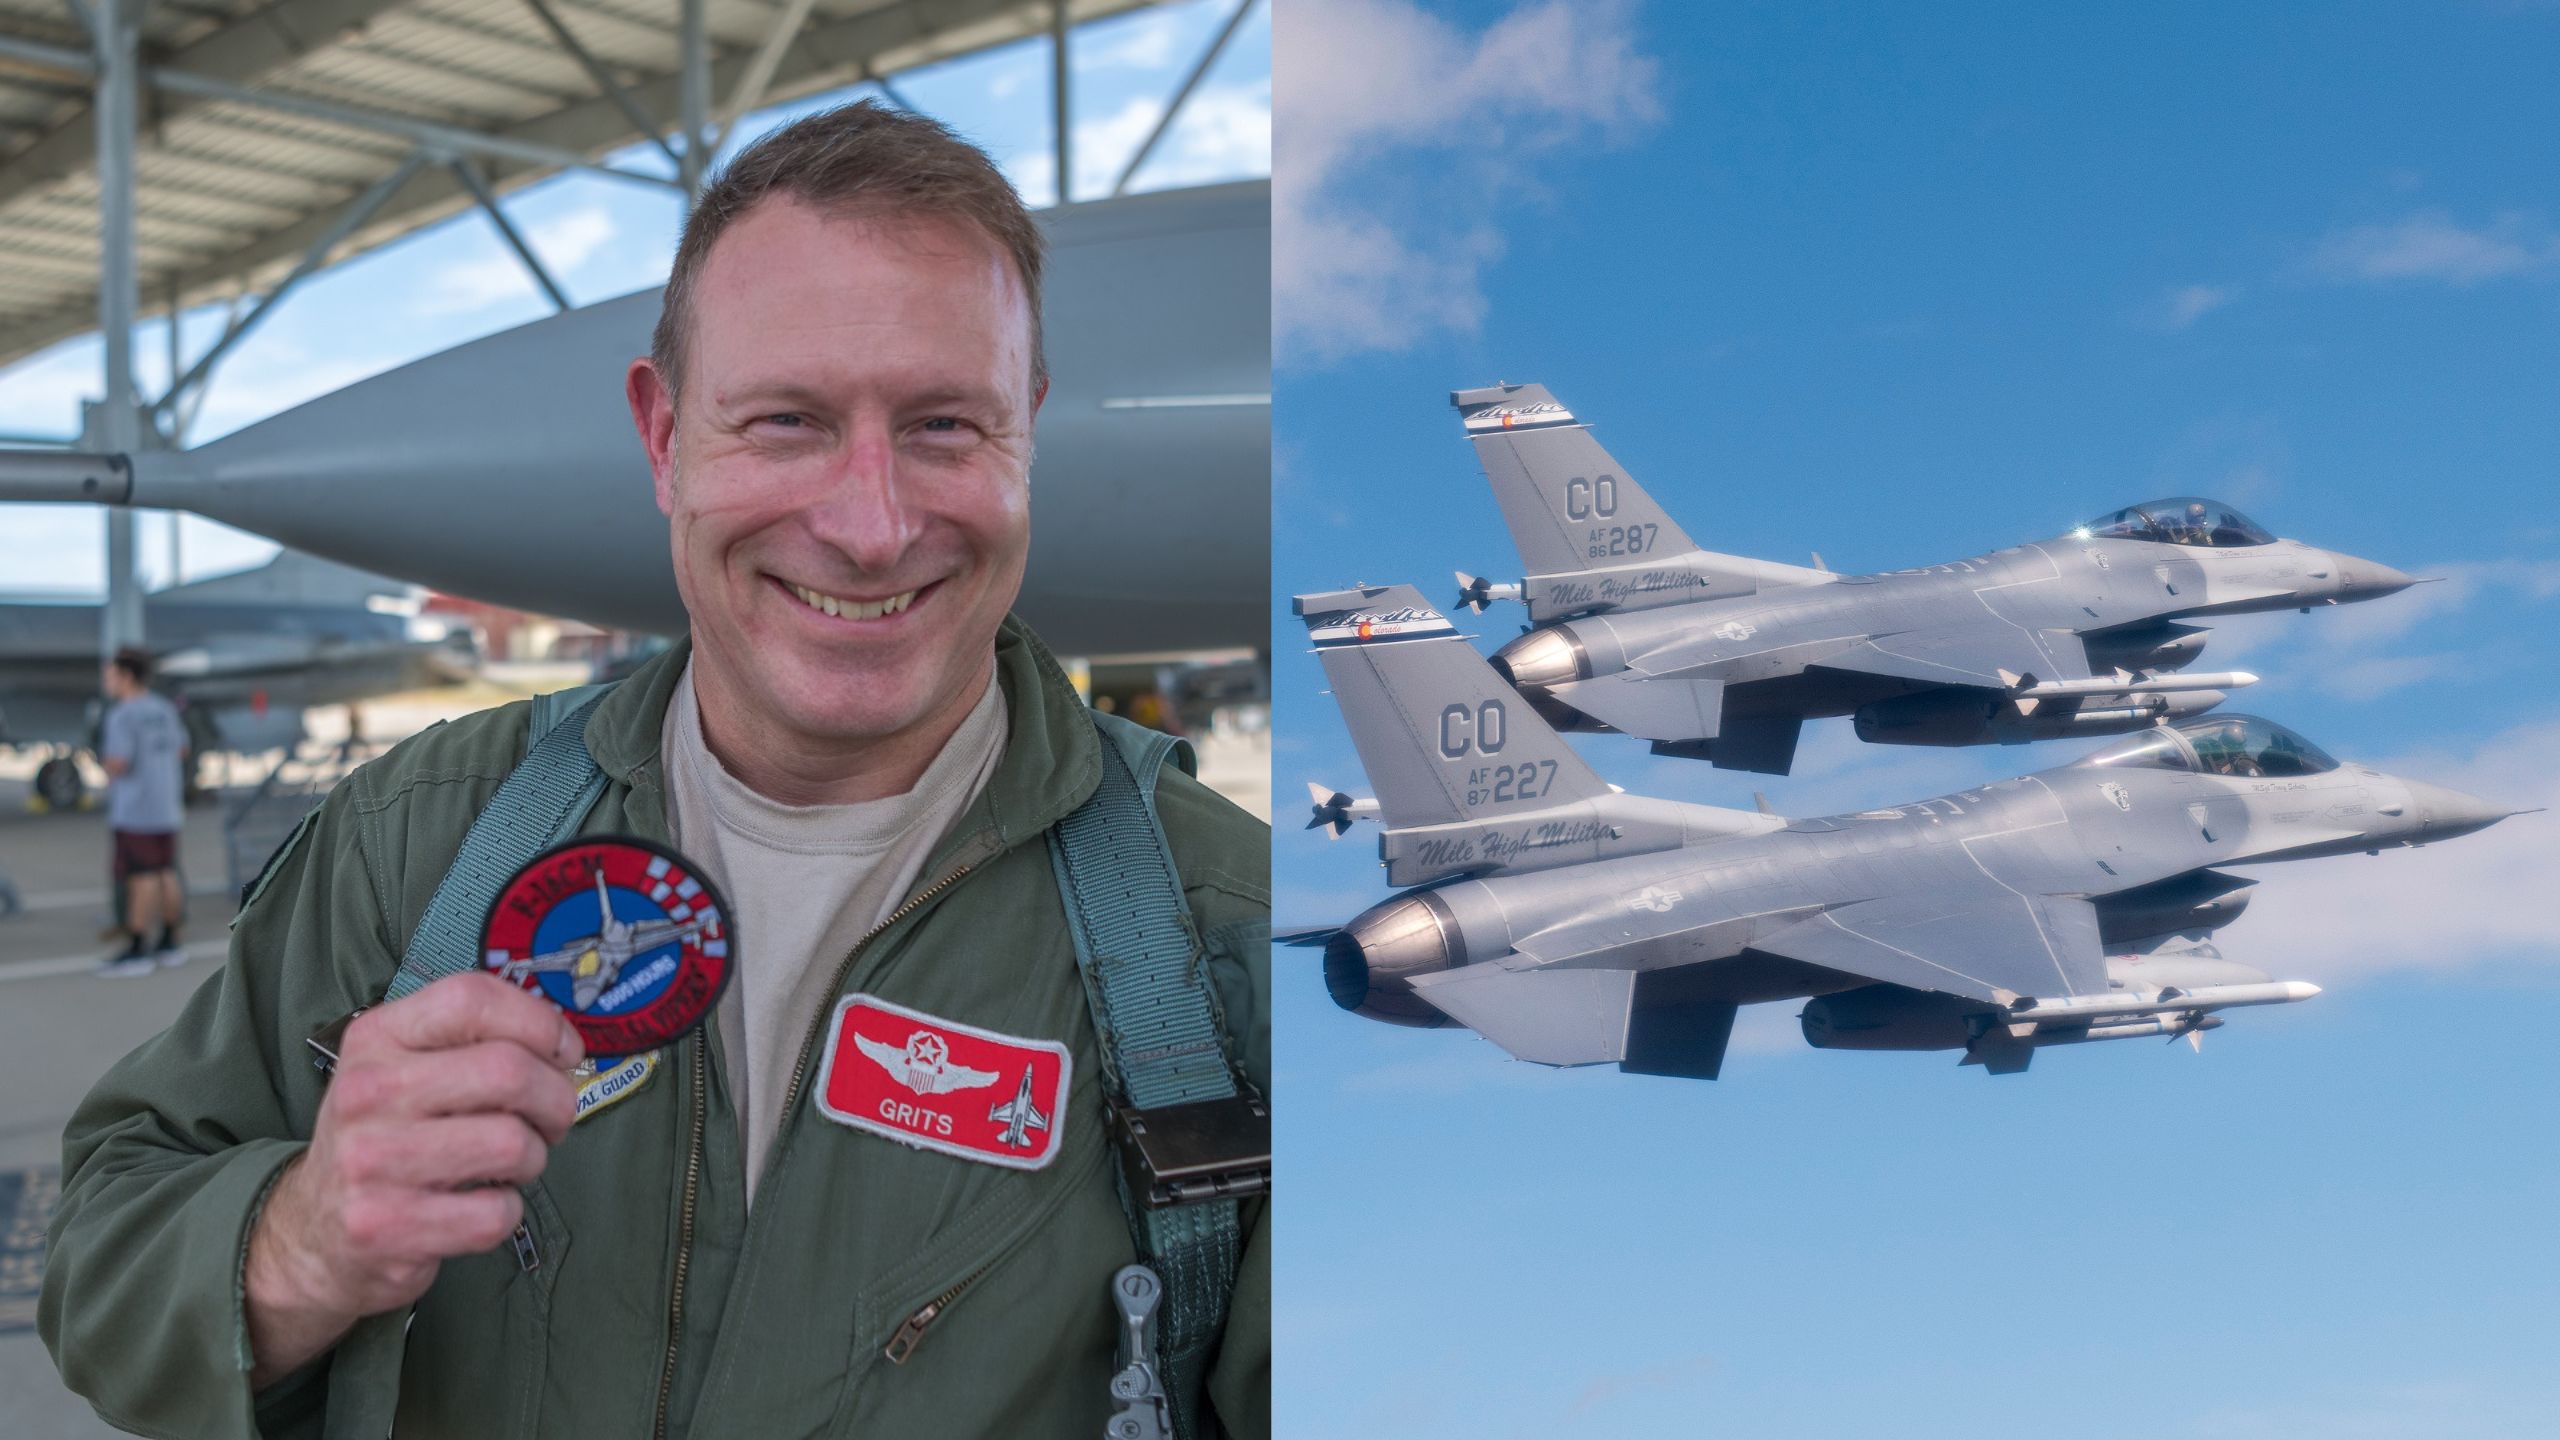 One of the F-16 pilots in the Oklahoma Air National Guard’s has reached the extraordinary milestone of 5,000 flight hours